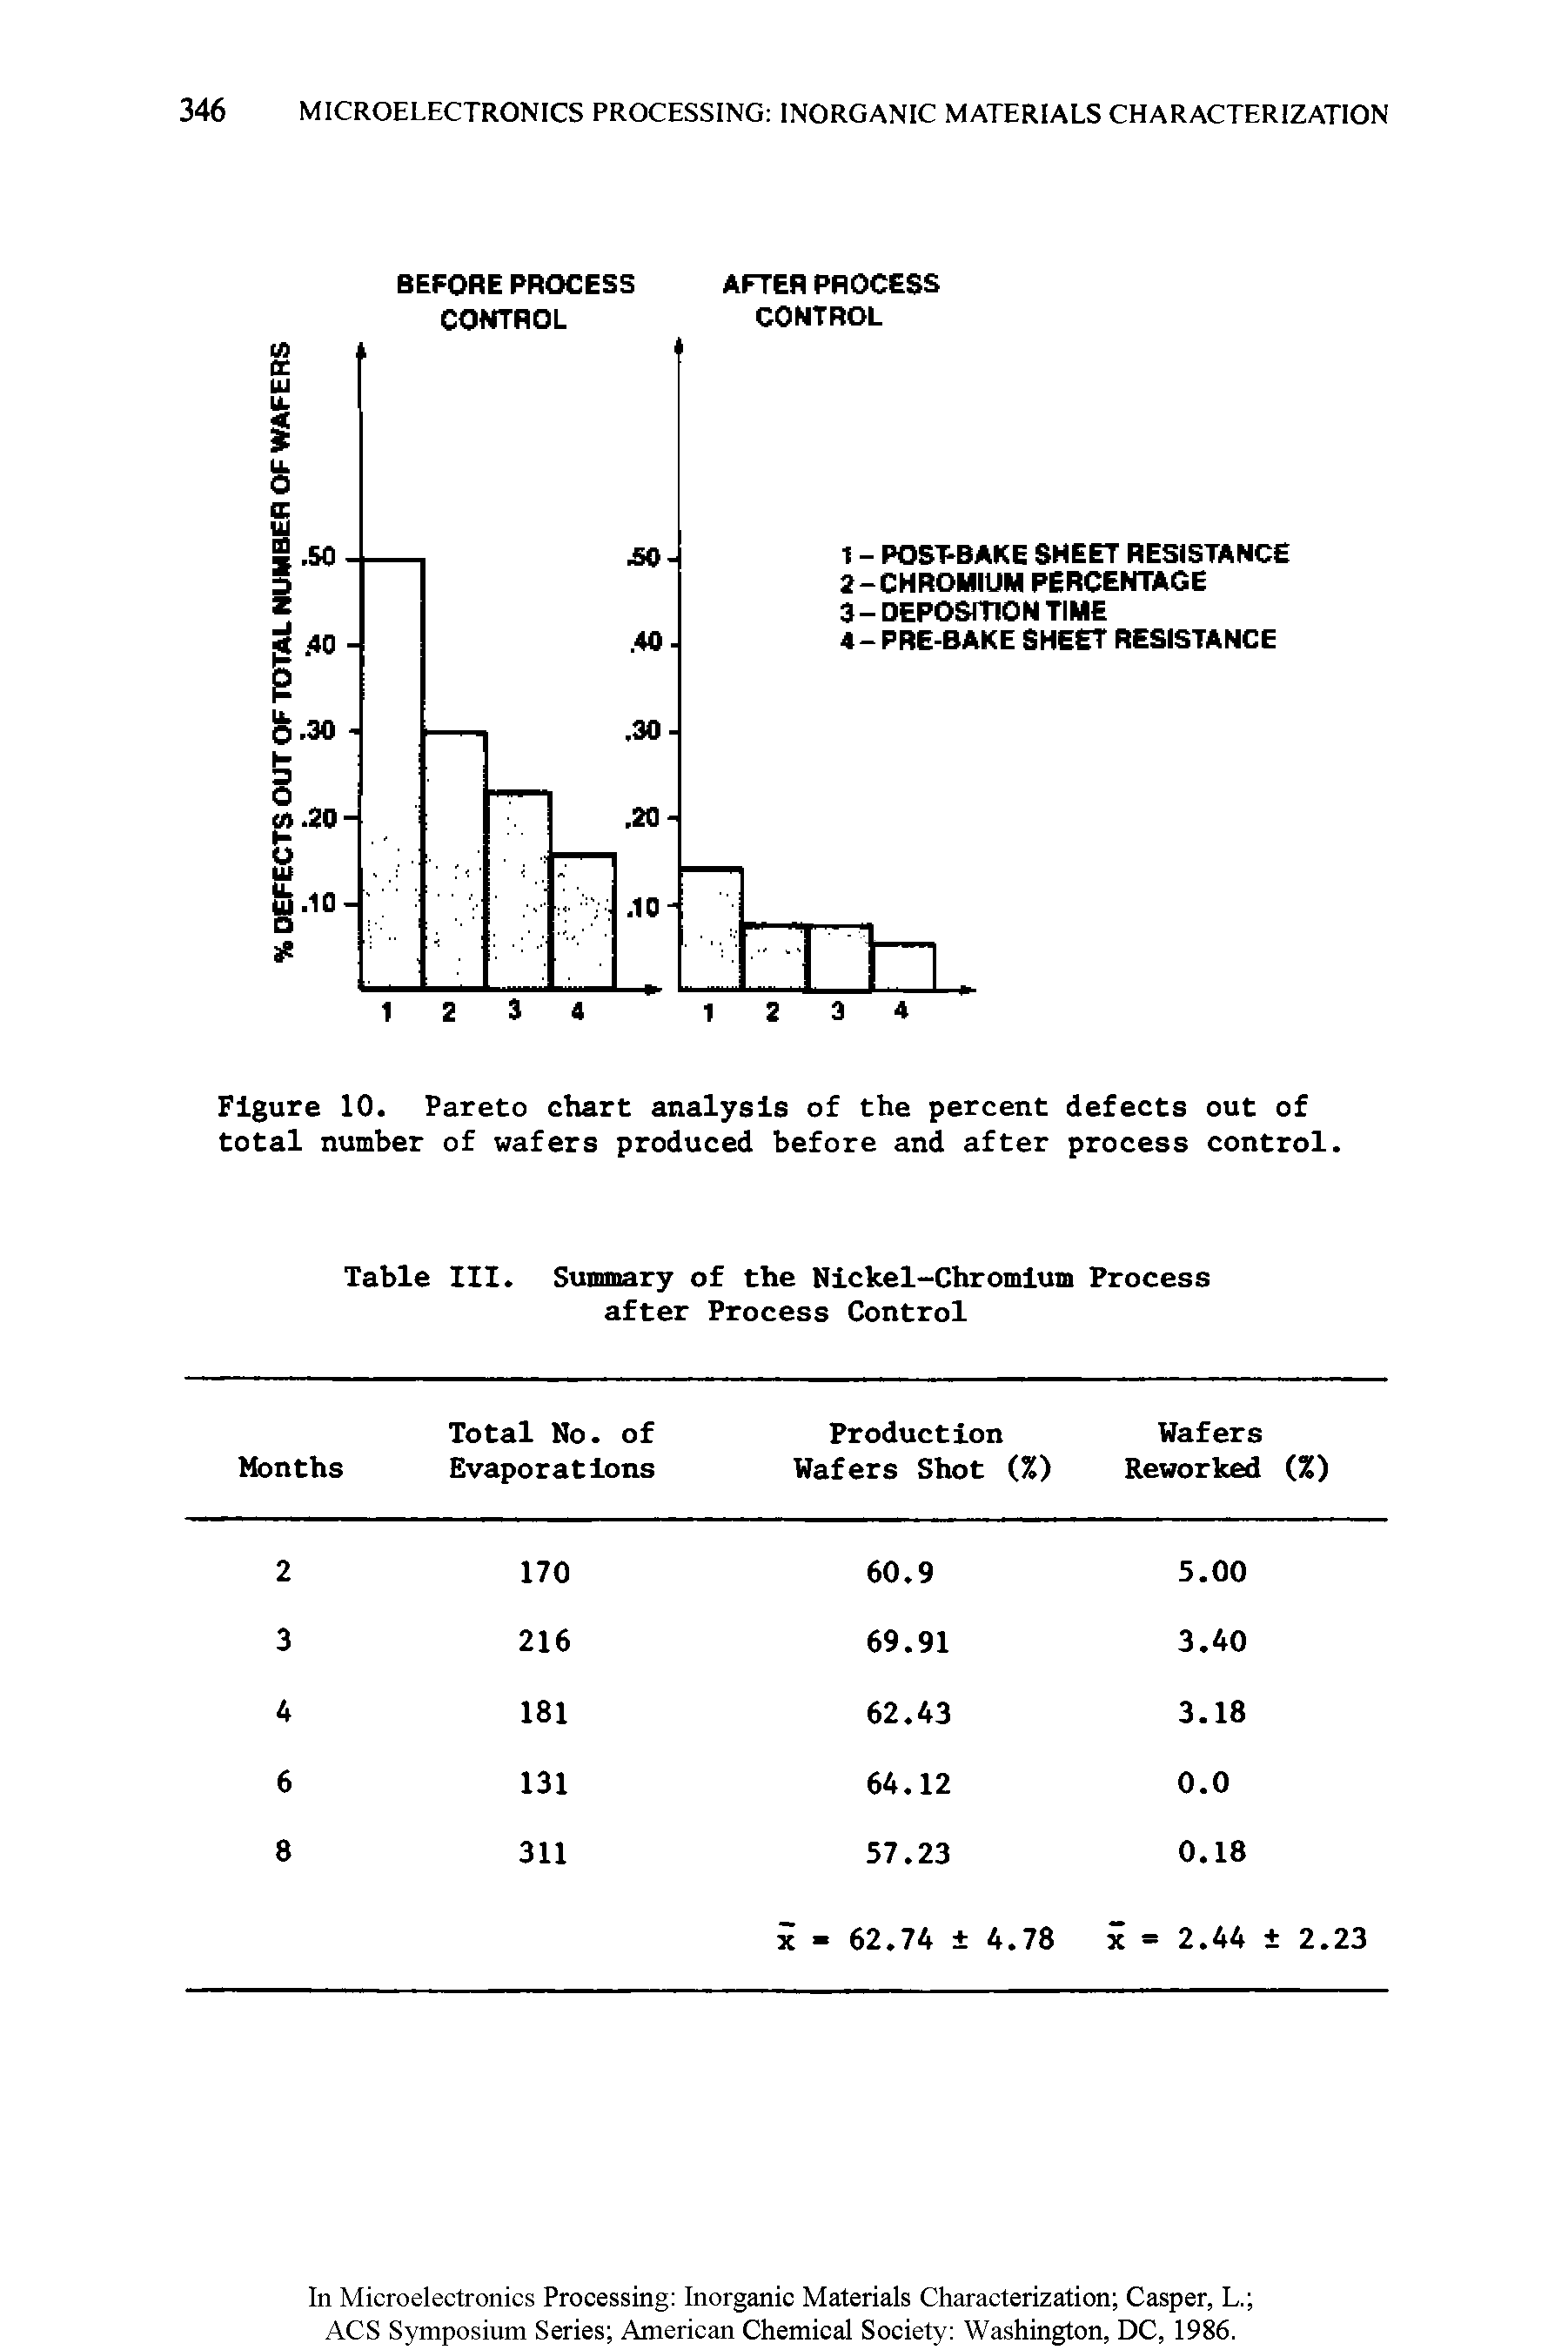 Figure 10. Pareto chart analysis of the percent defects out of total number of wafers produced before and after process control.